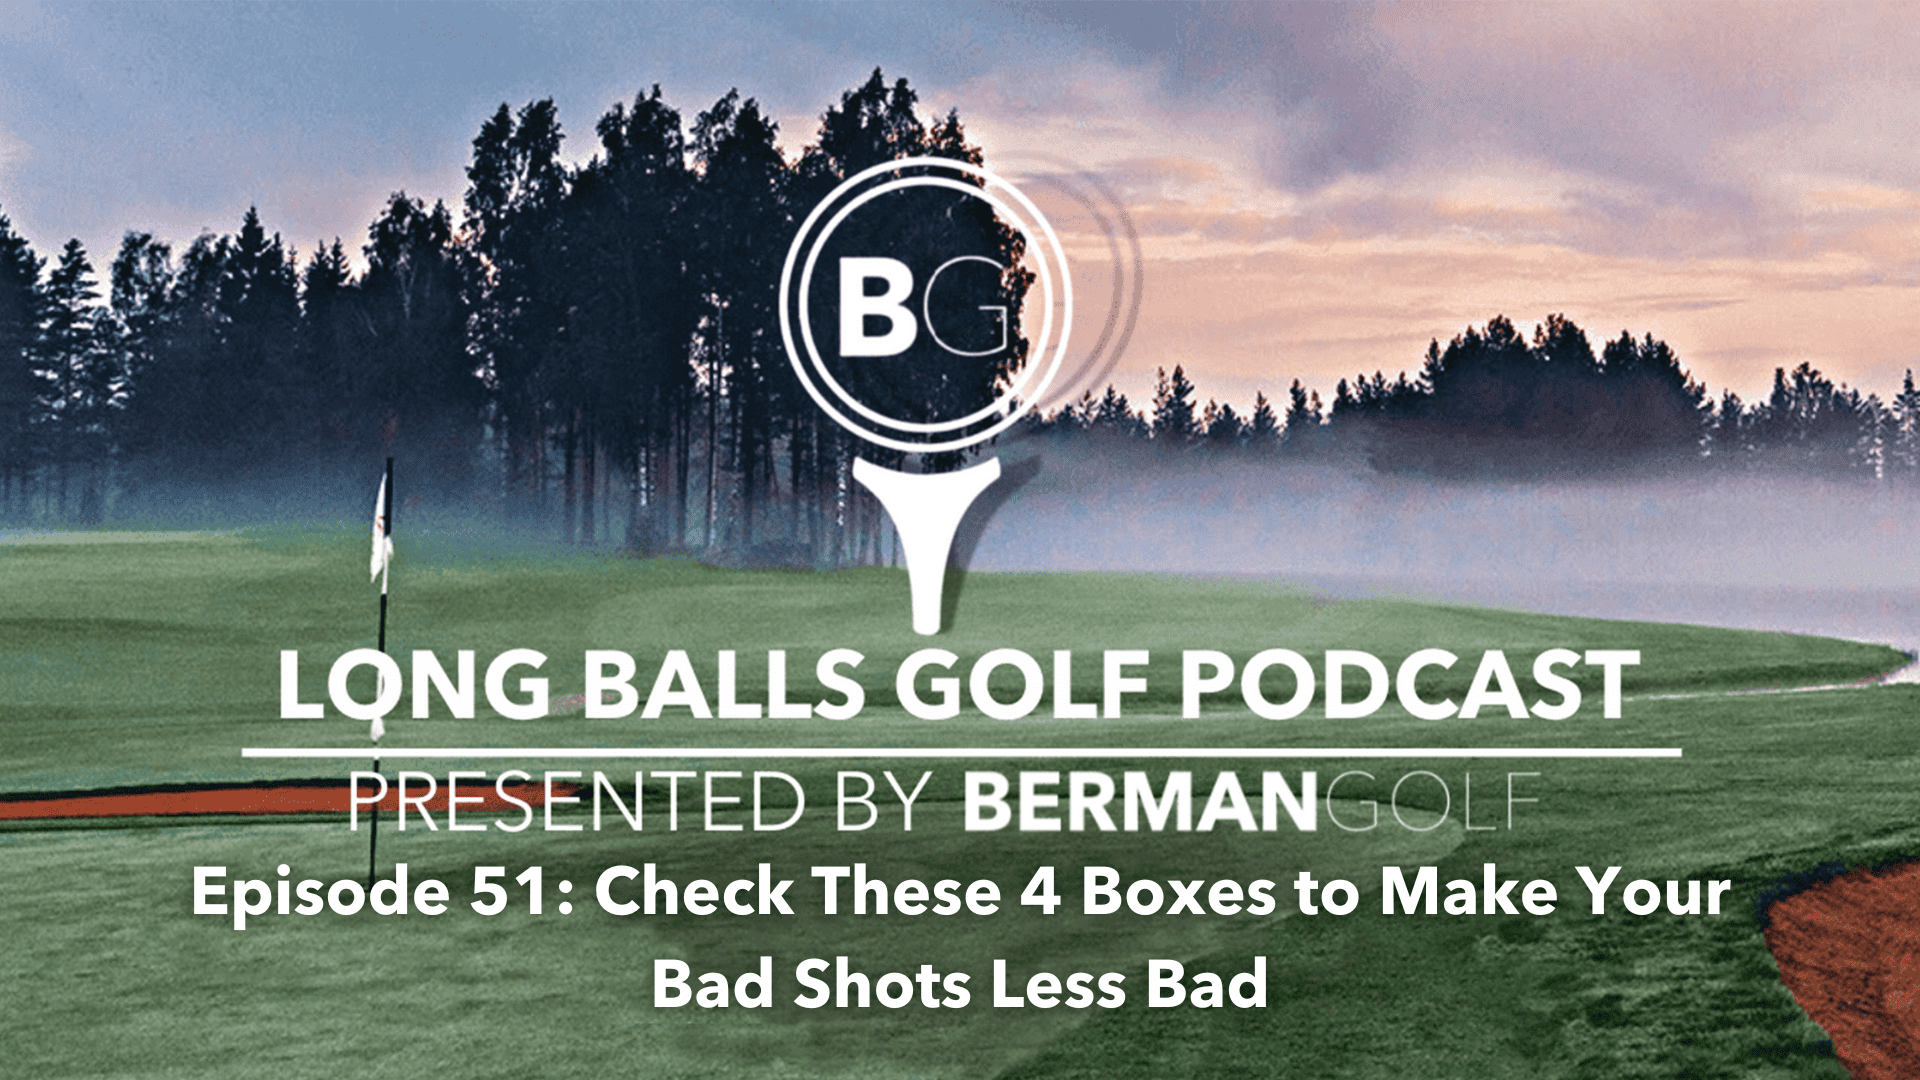 Episode 51: Check These 4 Boxes to Make Your Bad Shots Less Bad